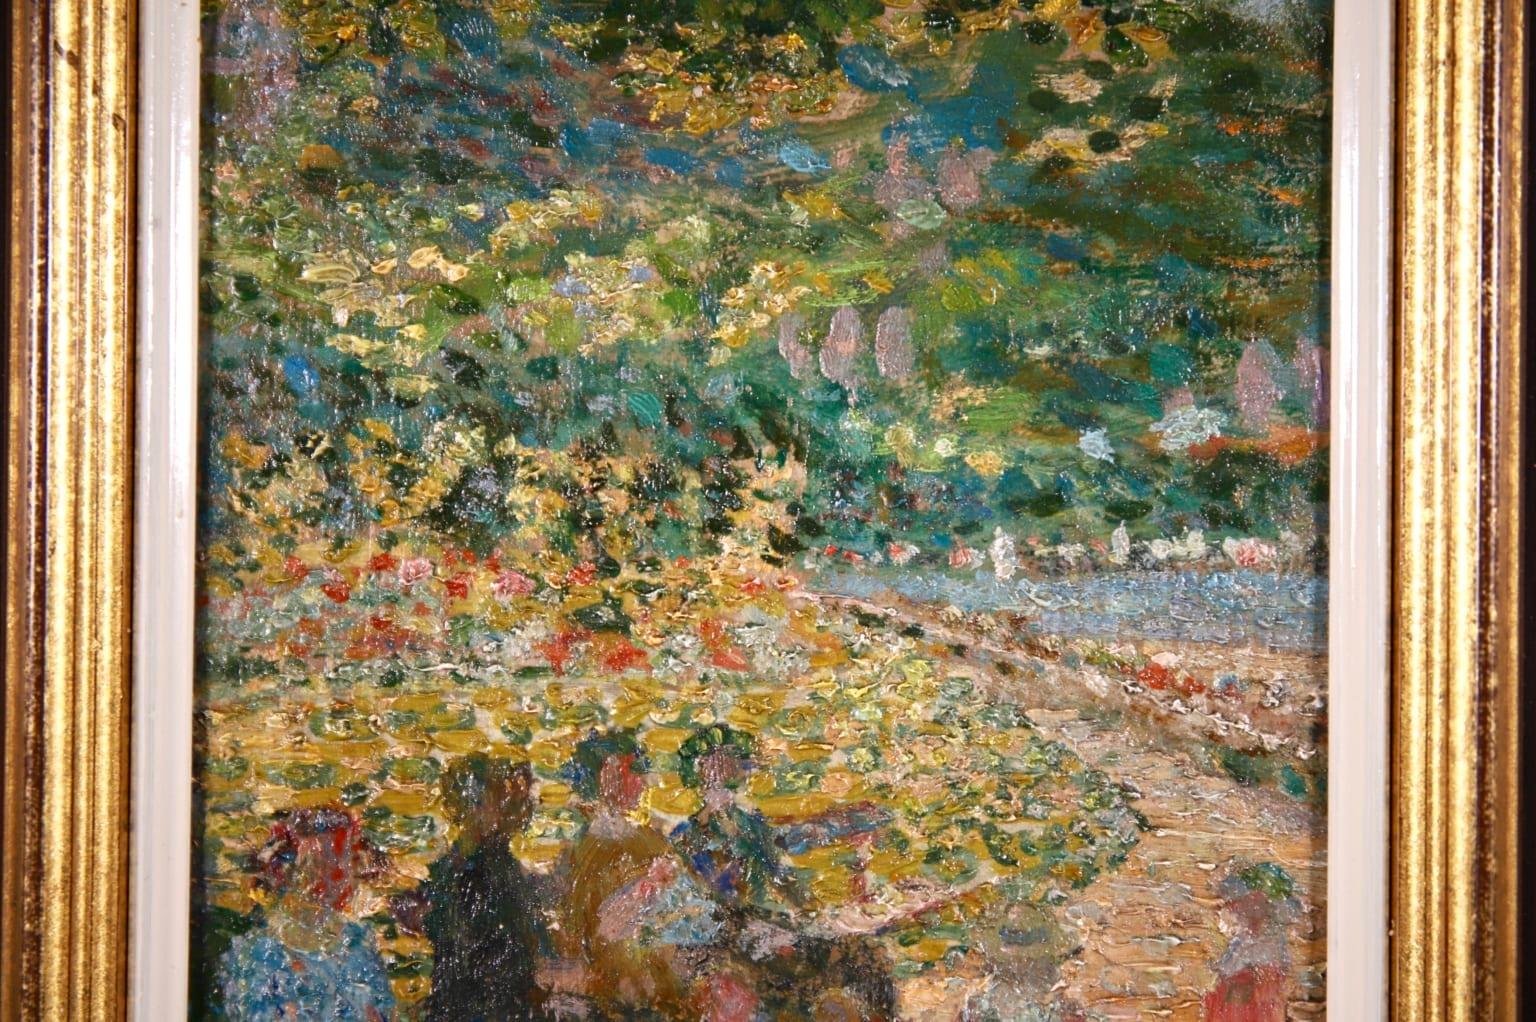 Mothers & Children - Impressionist Oil, Figures in Landscape by Ludovic Vallee - Pointillist Painting by Ludovic Vallée